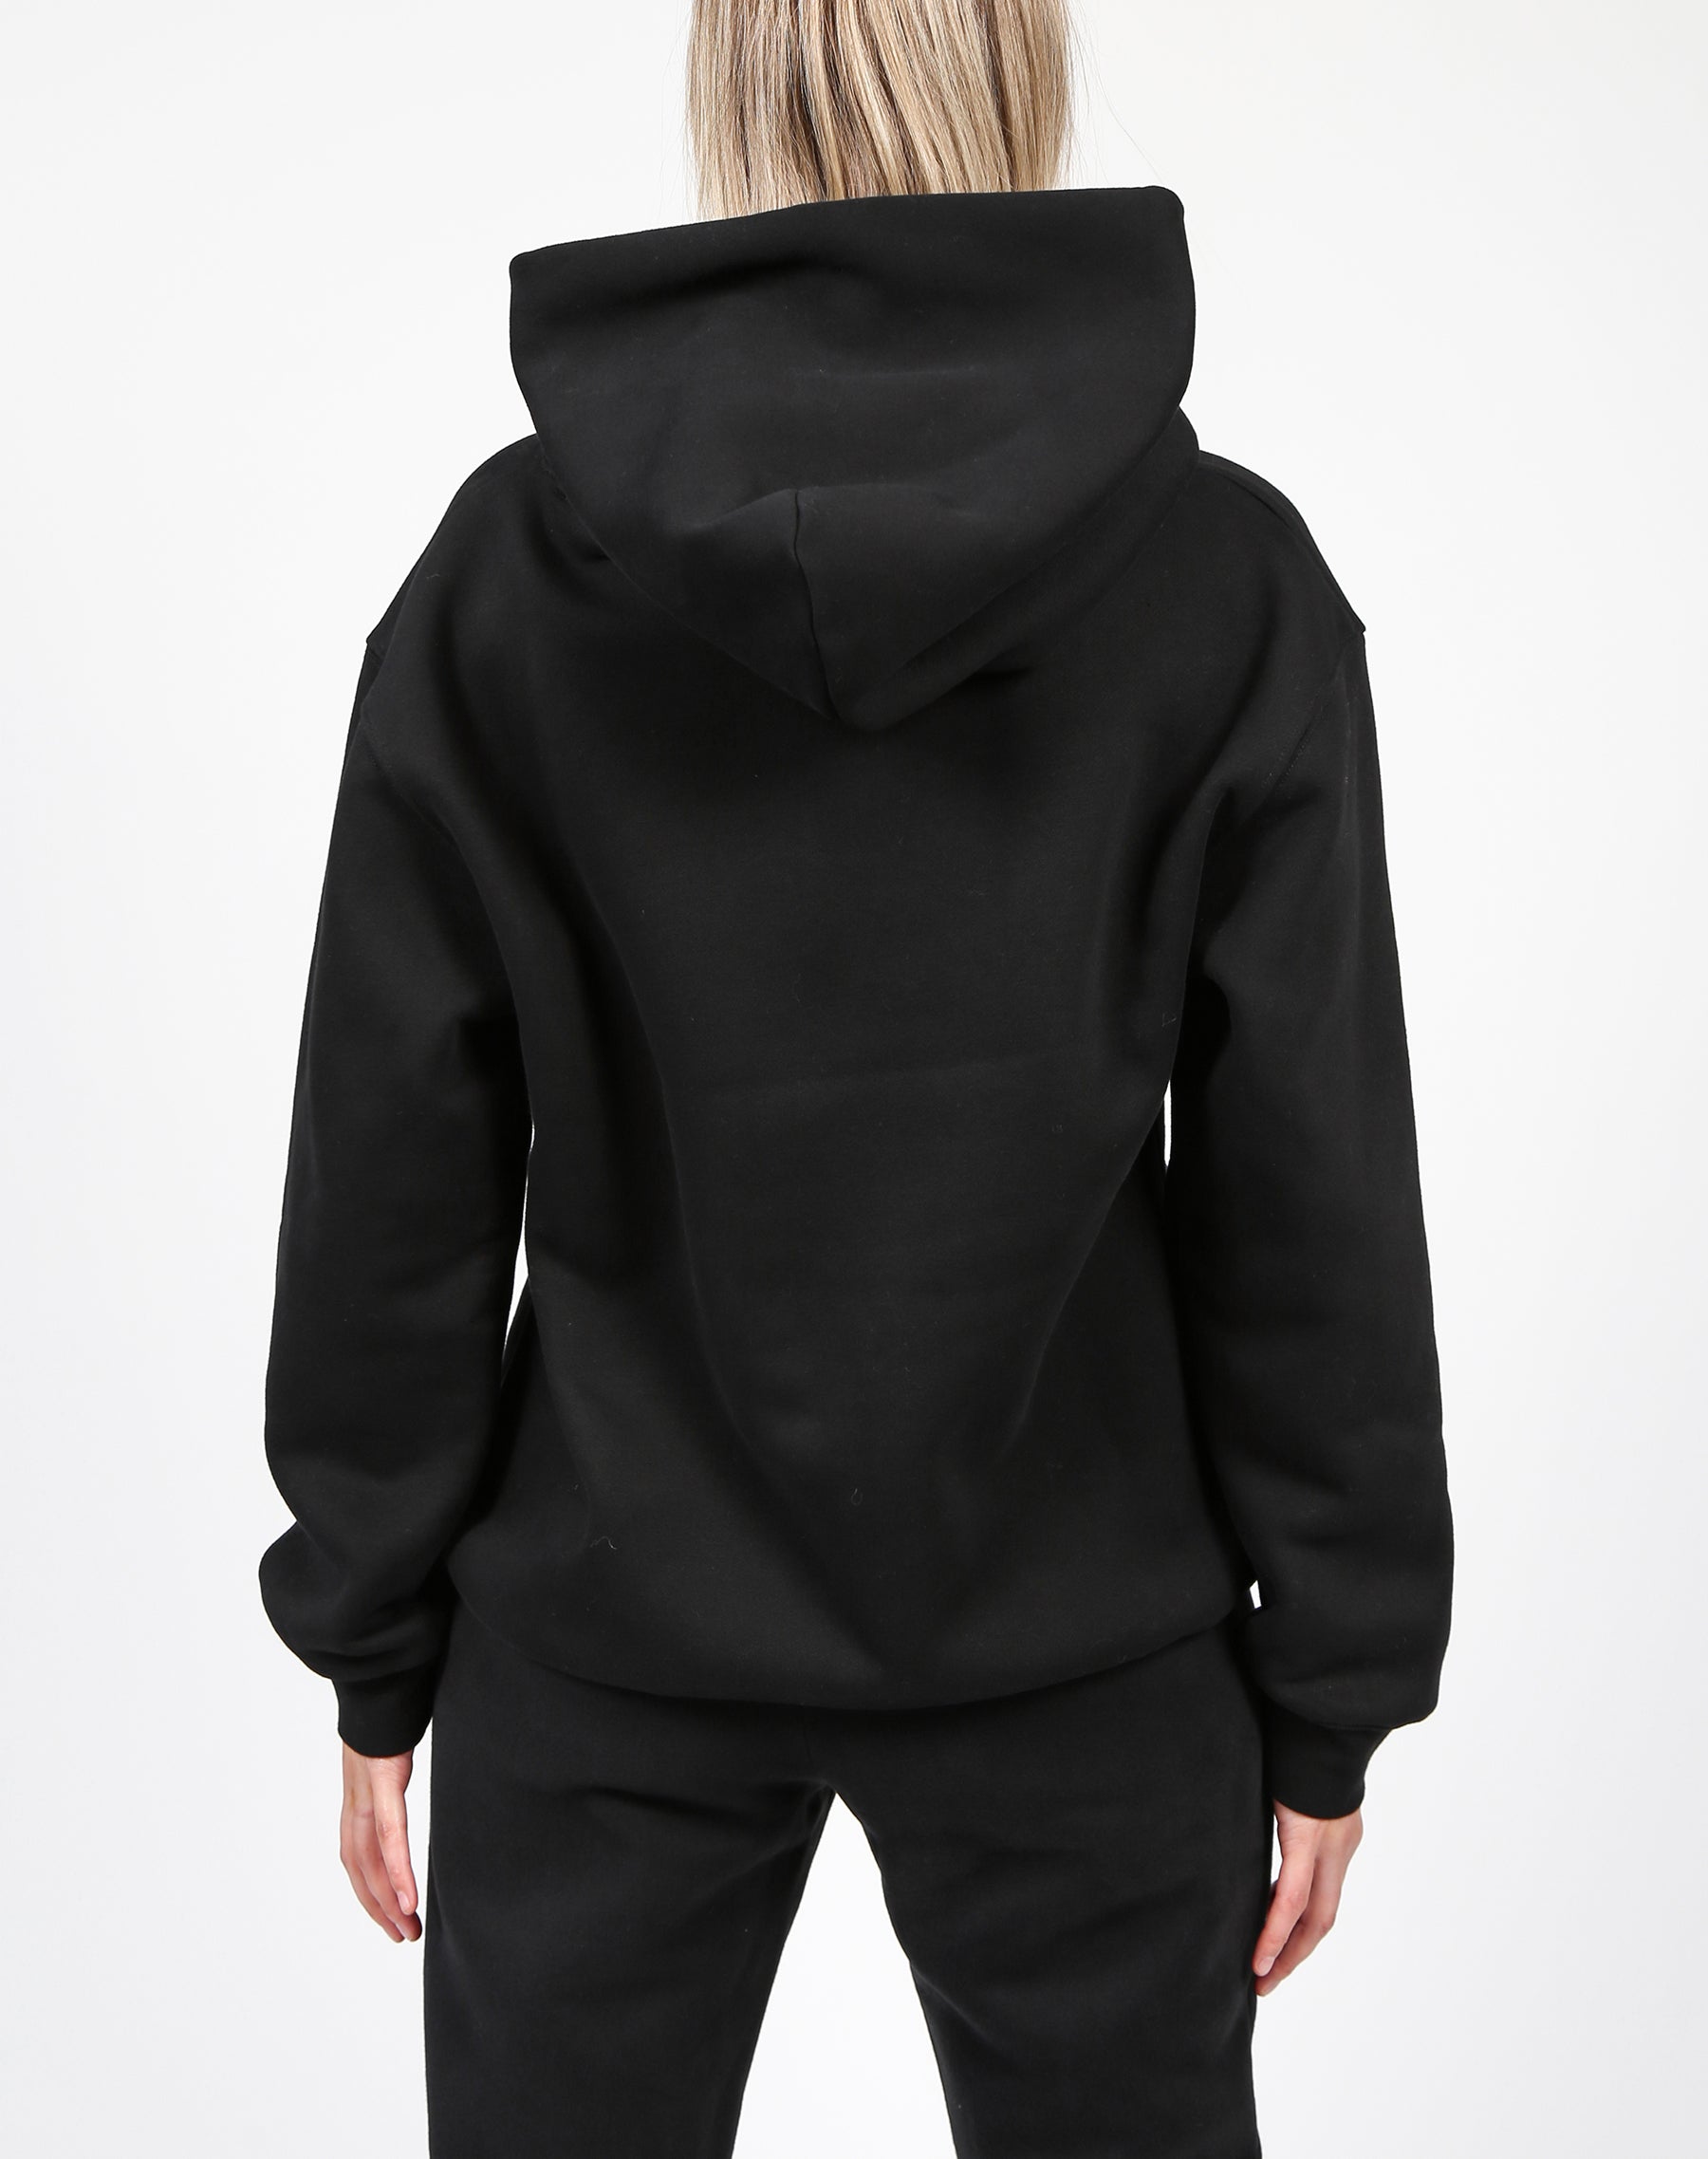 The "BLONDE" Embroidered Classic Hoodie | Black